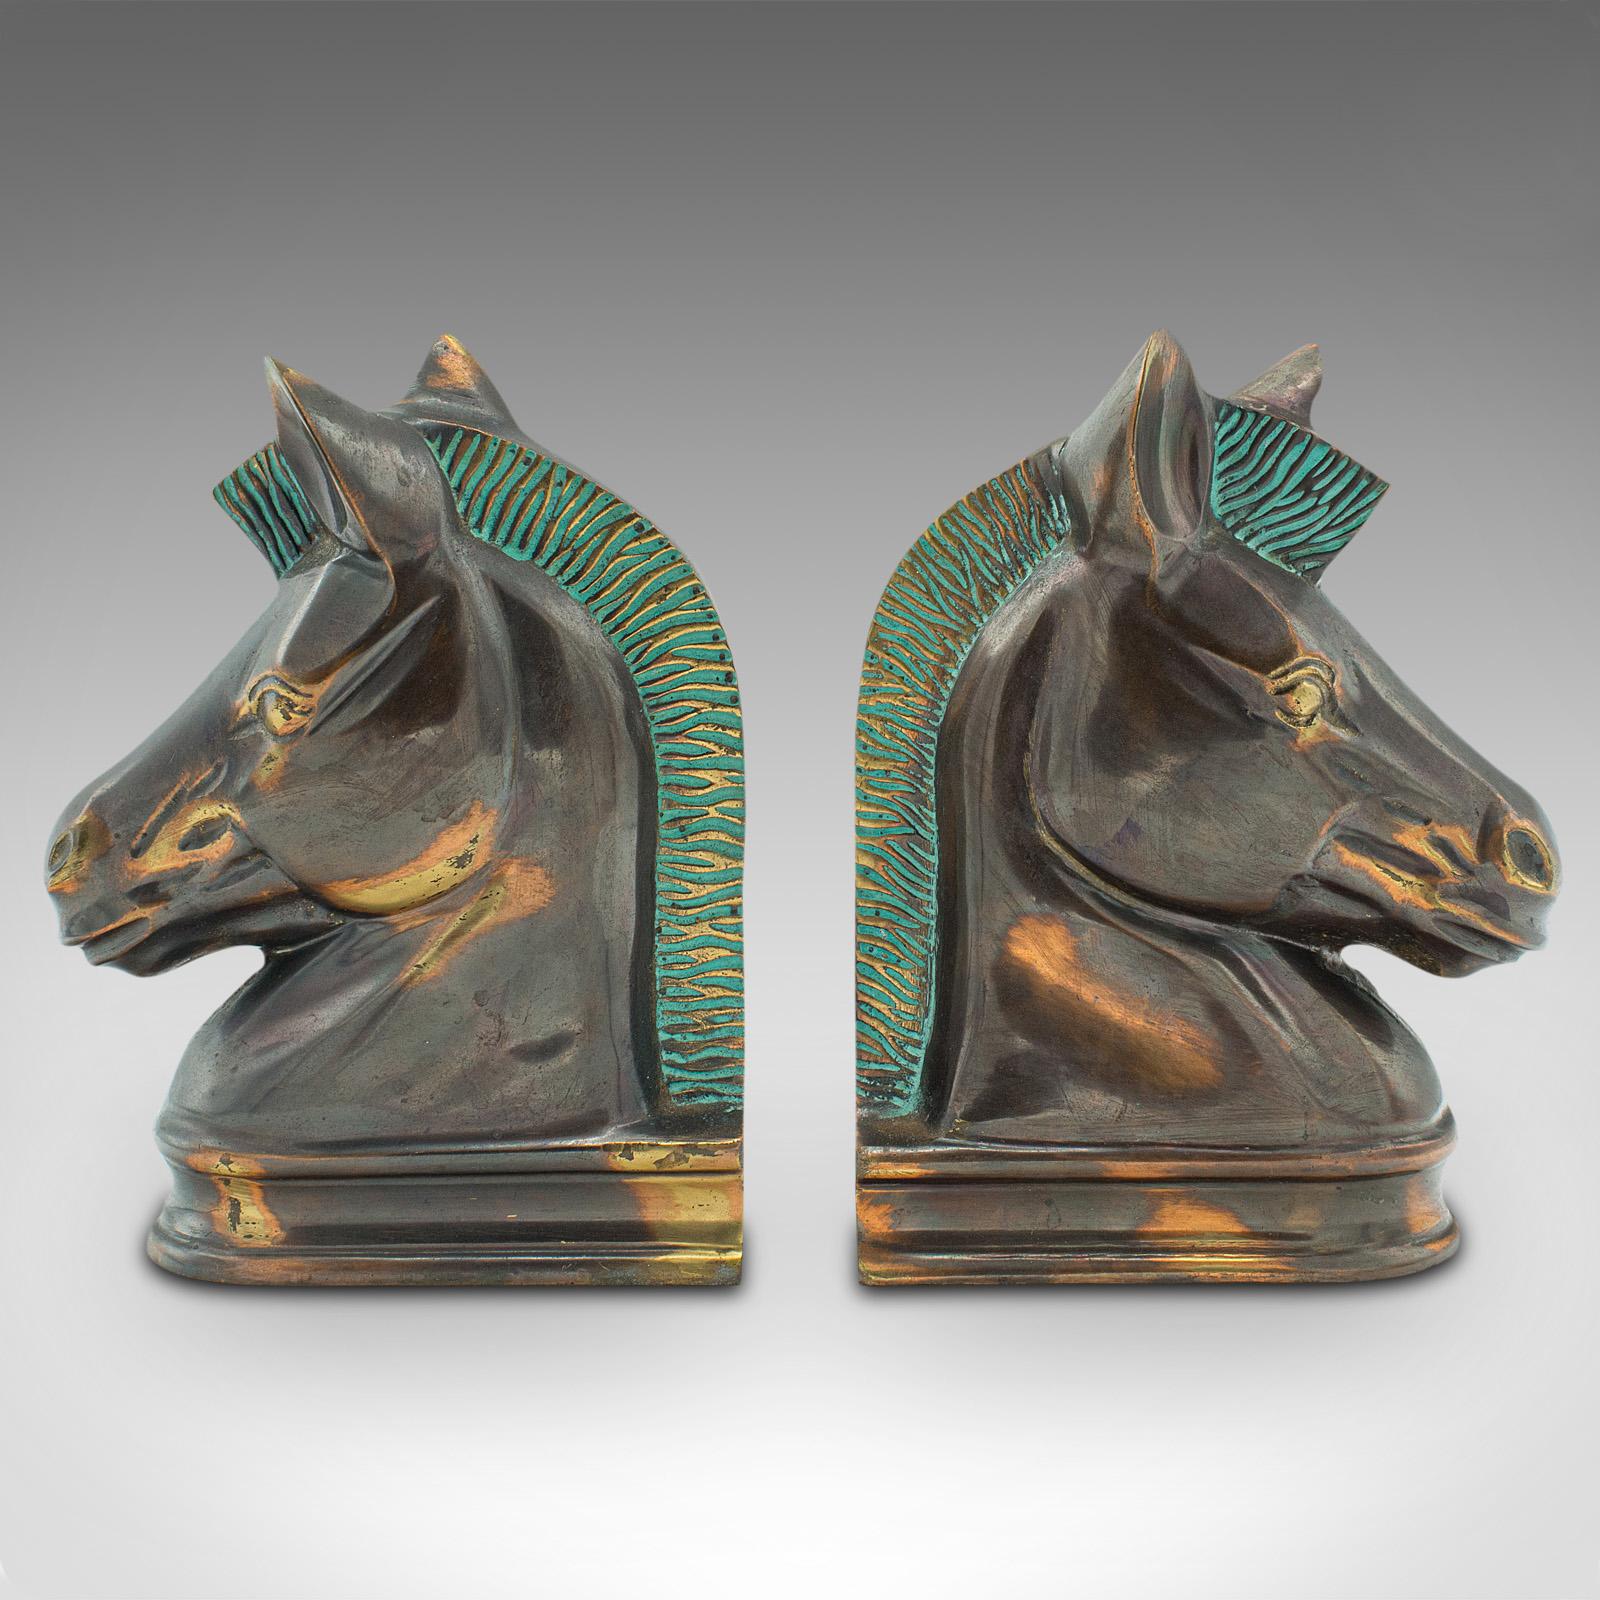 Pair of Vintage Horse Bust Bookends, English, Cast Brass, Decorative, Novel Rest In Good Condition For Sale In Hele, Devon, GB